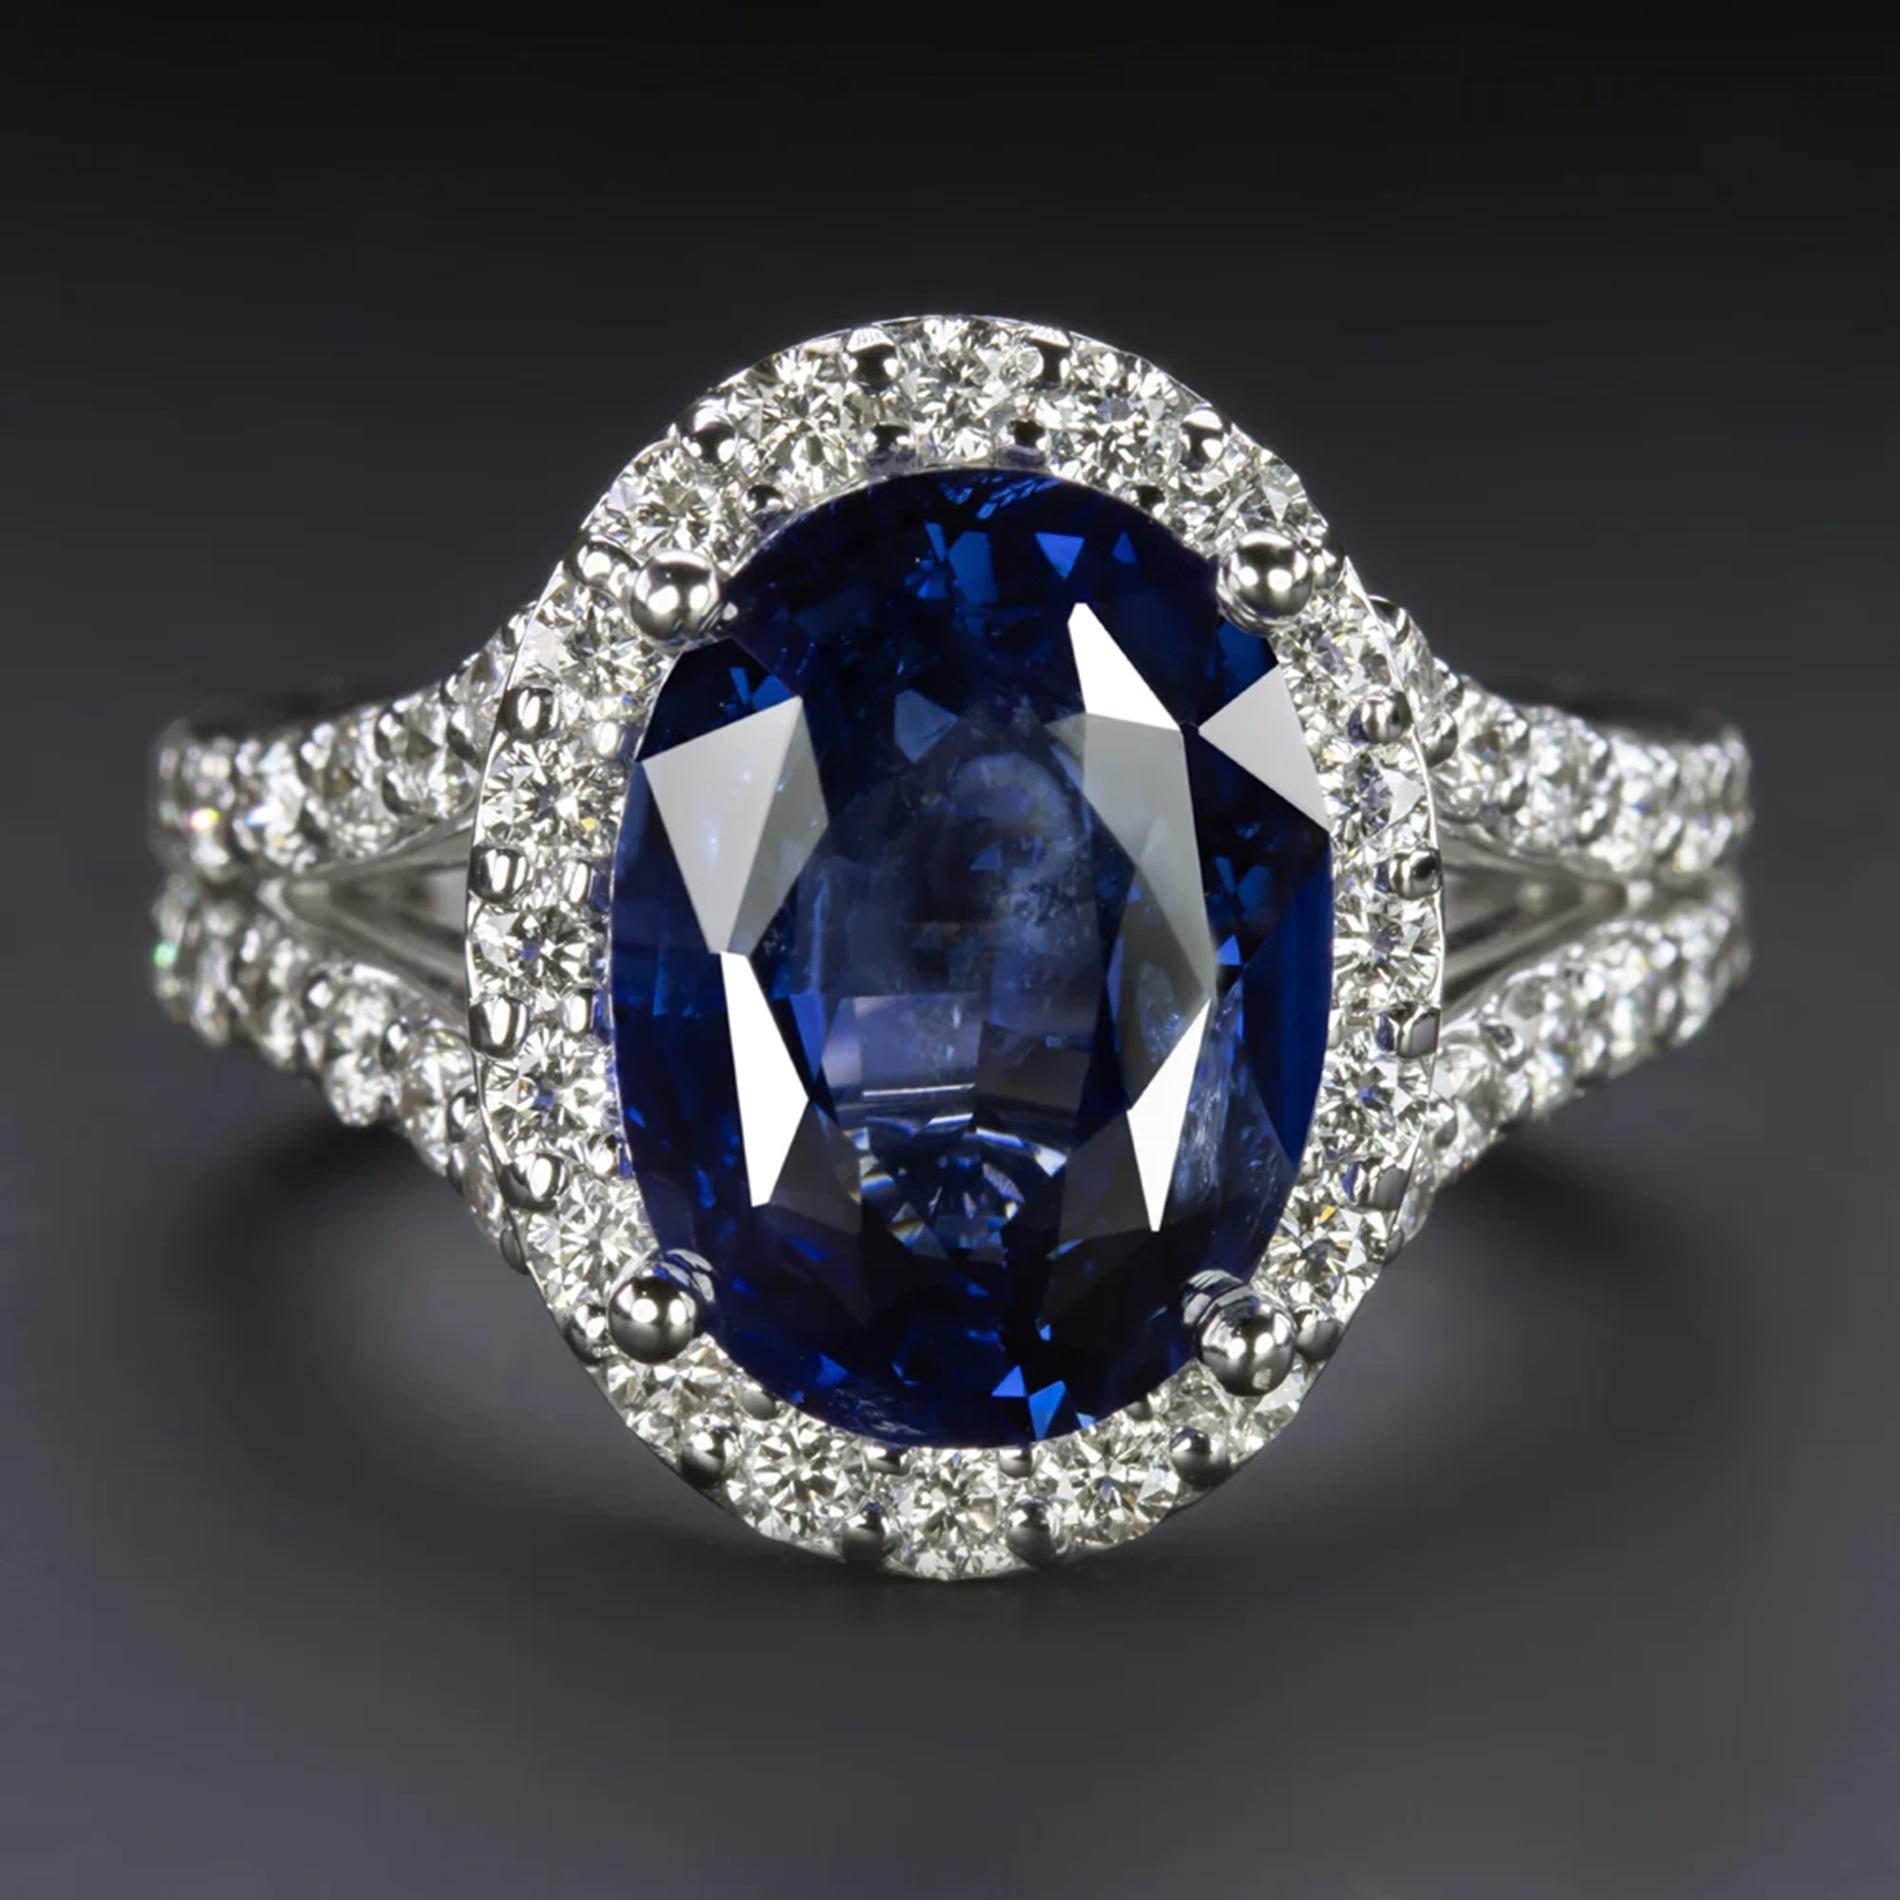 Contemporary GIA Certified 5.45 Carat Blue Sapphire Diamond Ring For Sale